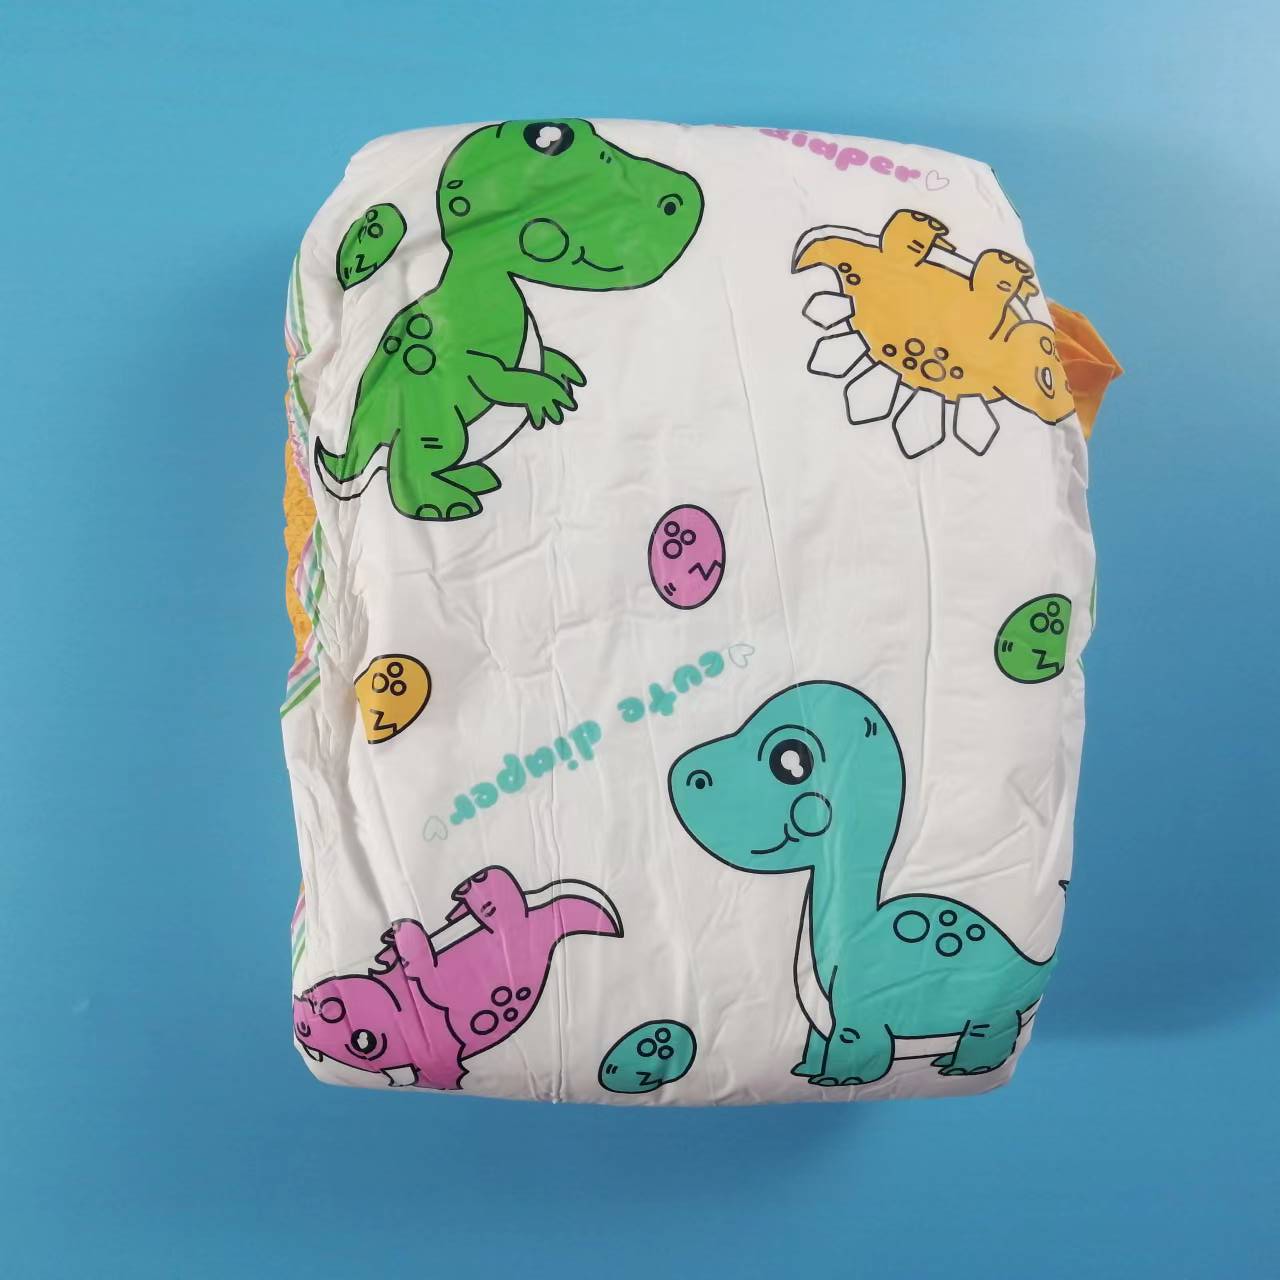 High quality abdl Adult Disposable diapers soft and breathable fabric with High water absorption for elderly patients